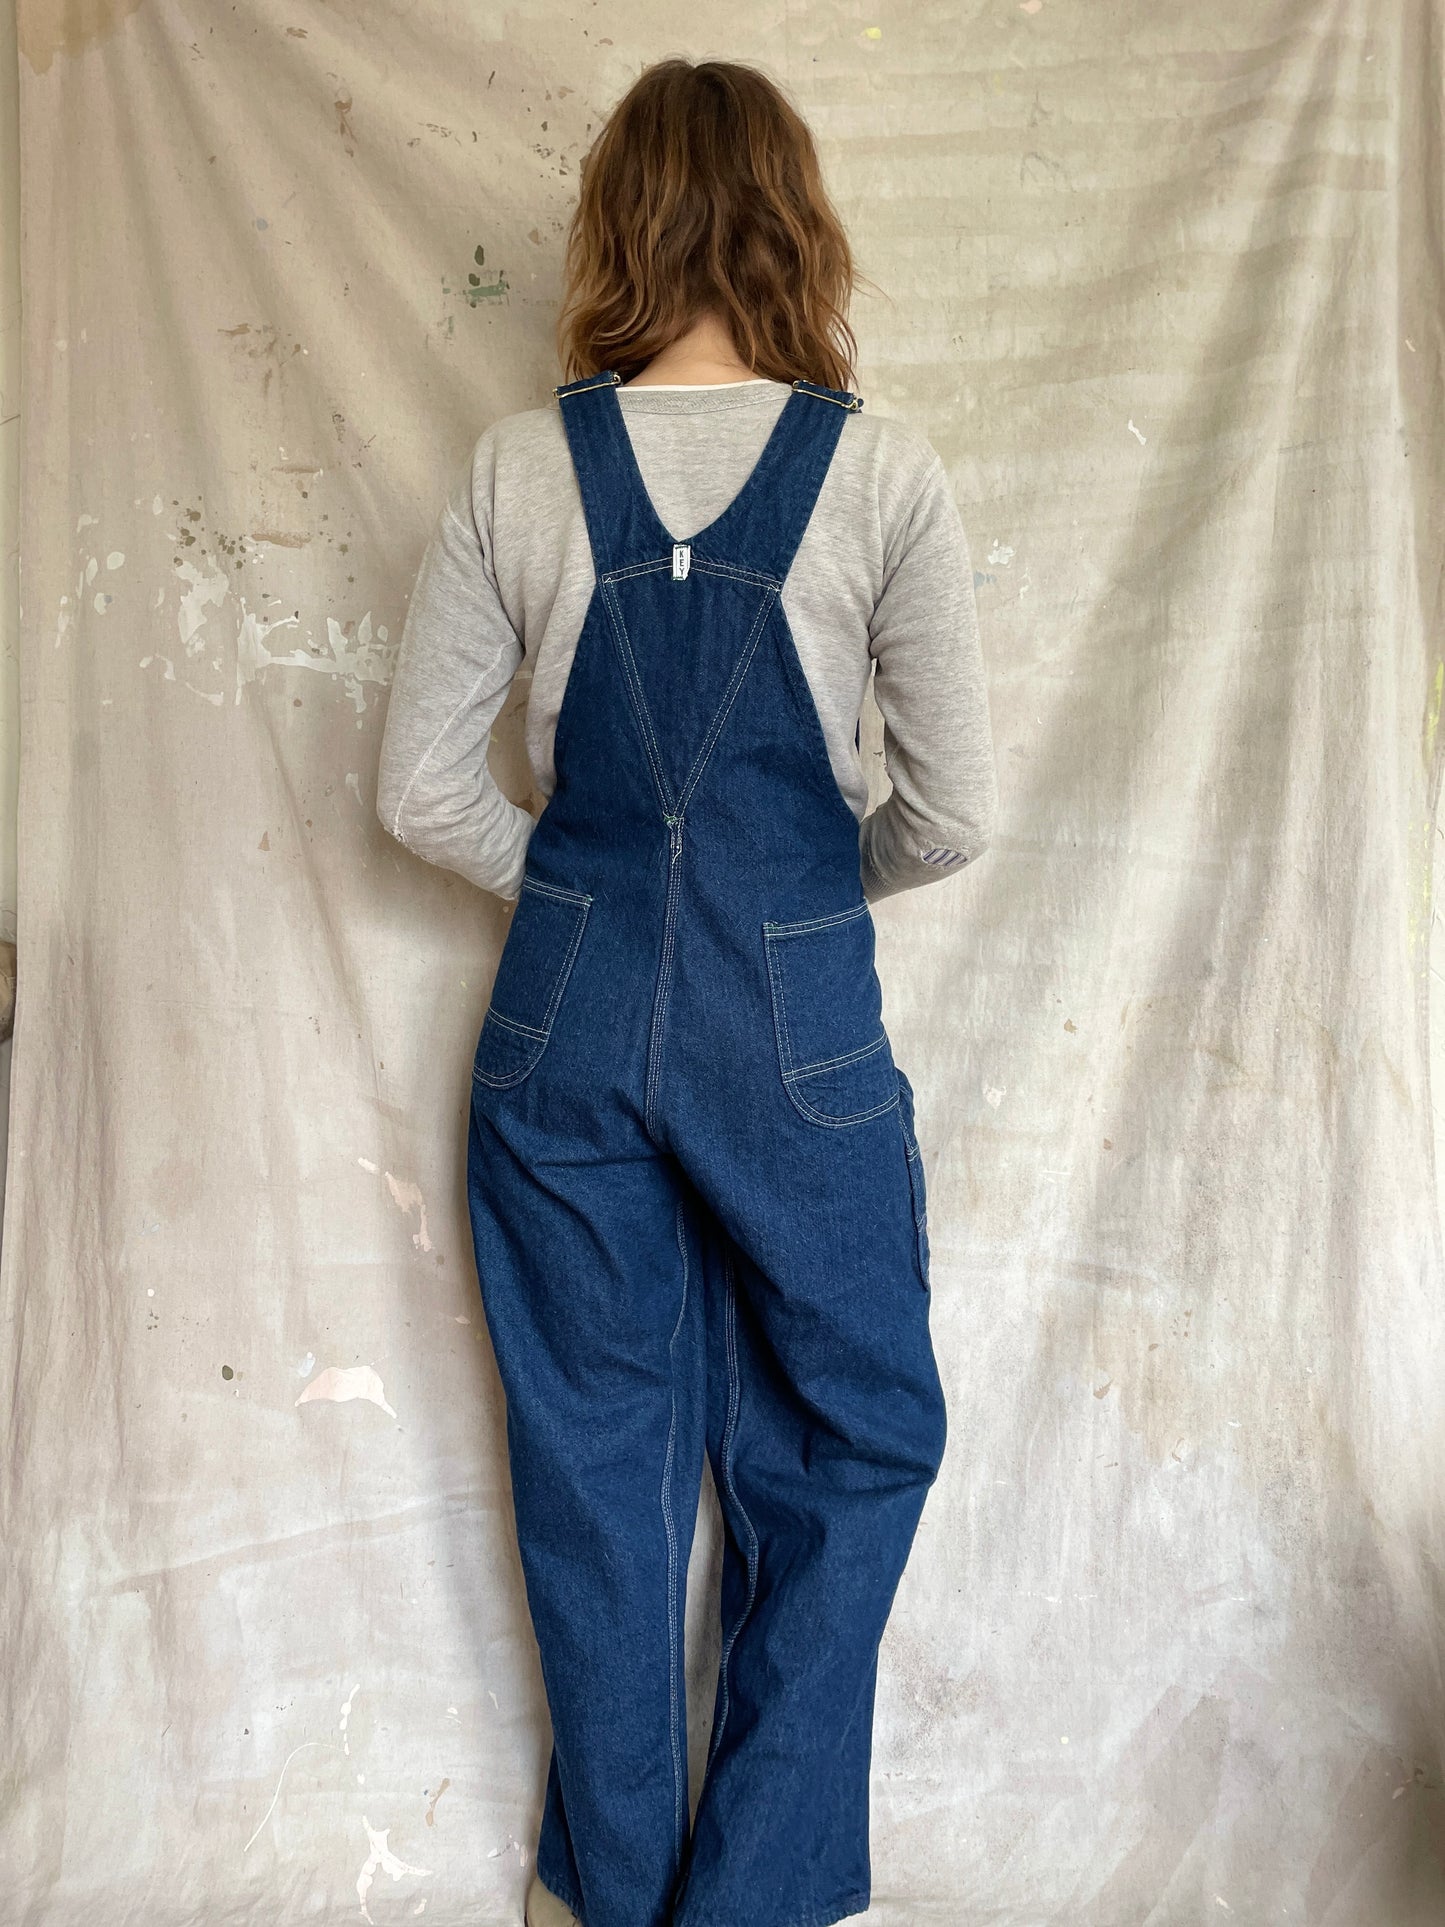 90s Key Imperial Dark Wash Overalls